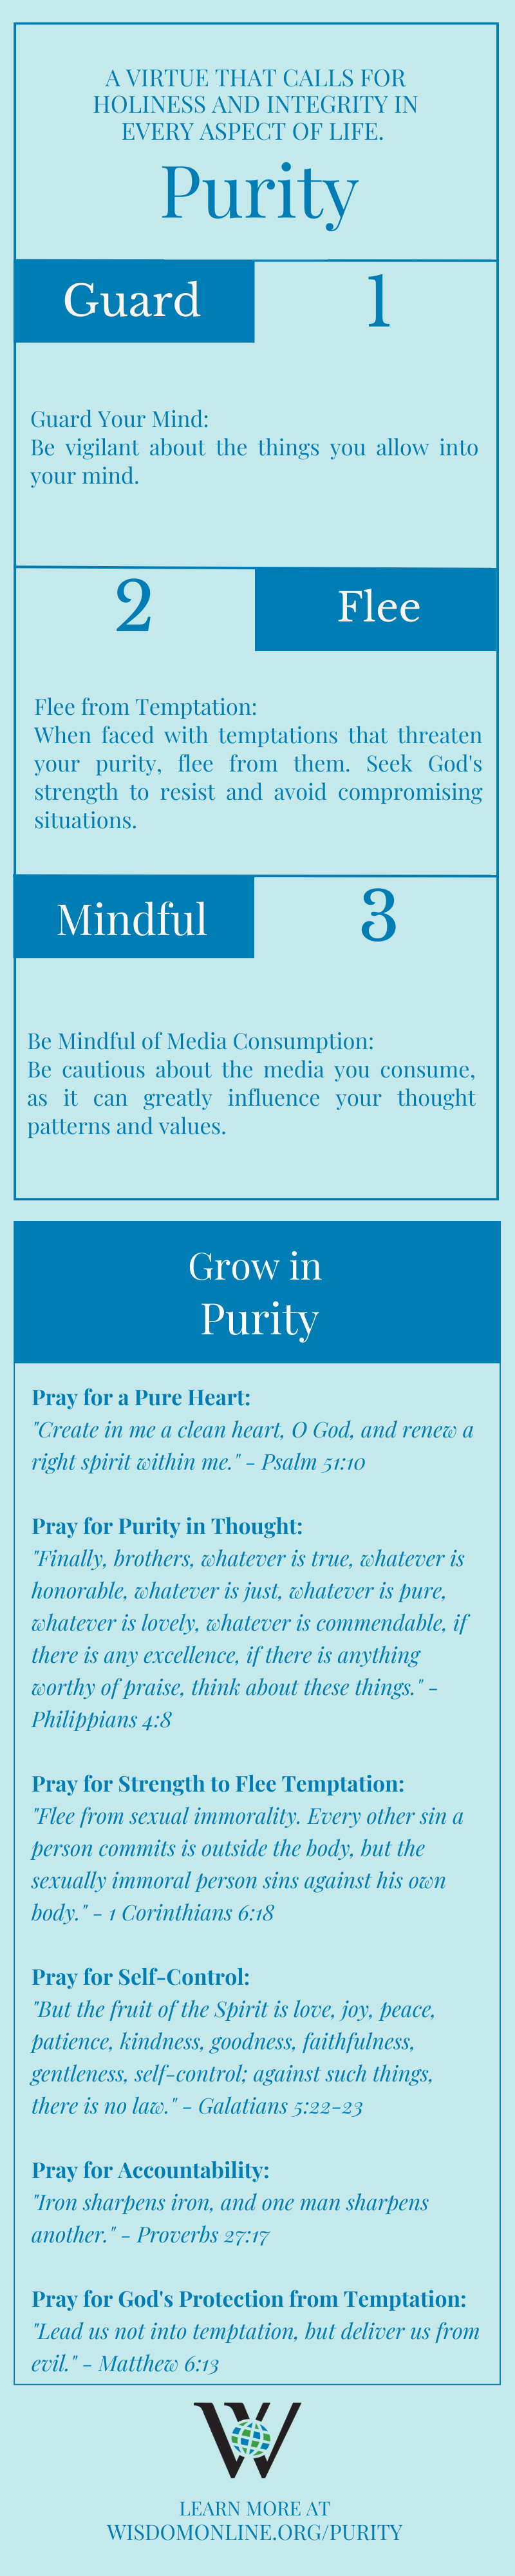 Infographic on the Biblical characteristic of putiry